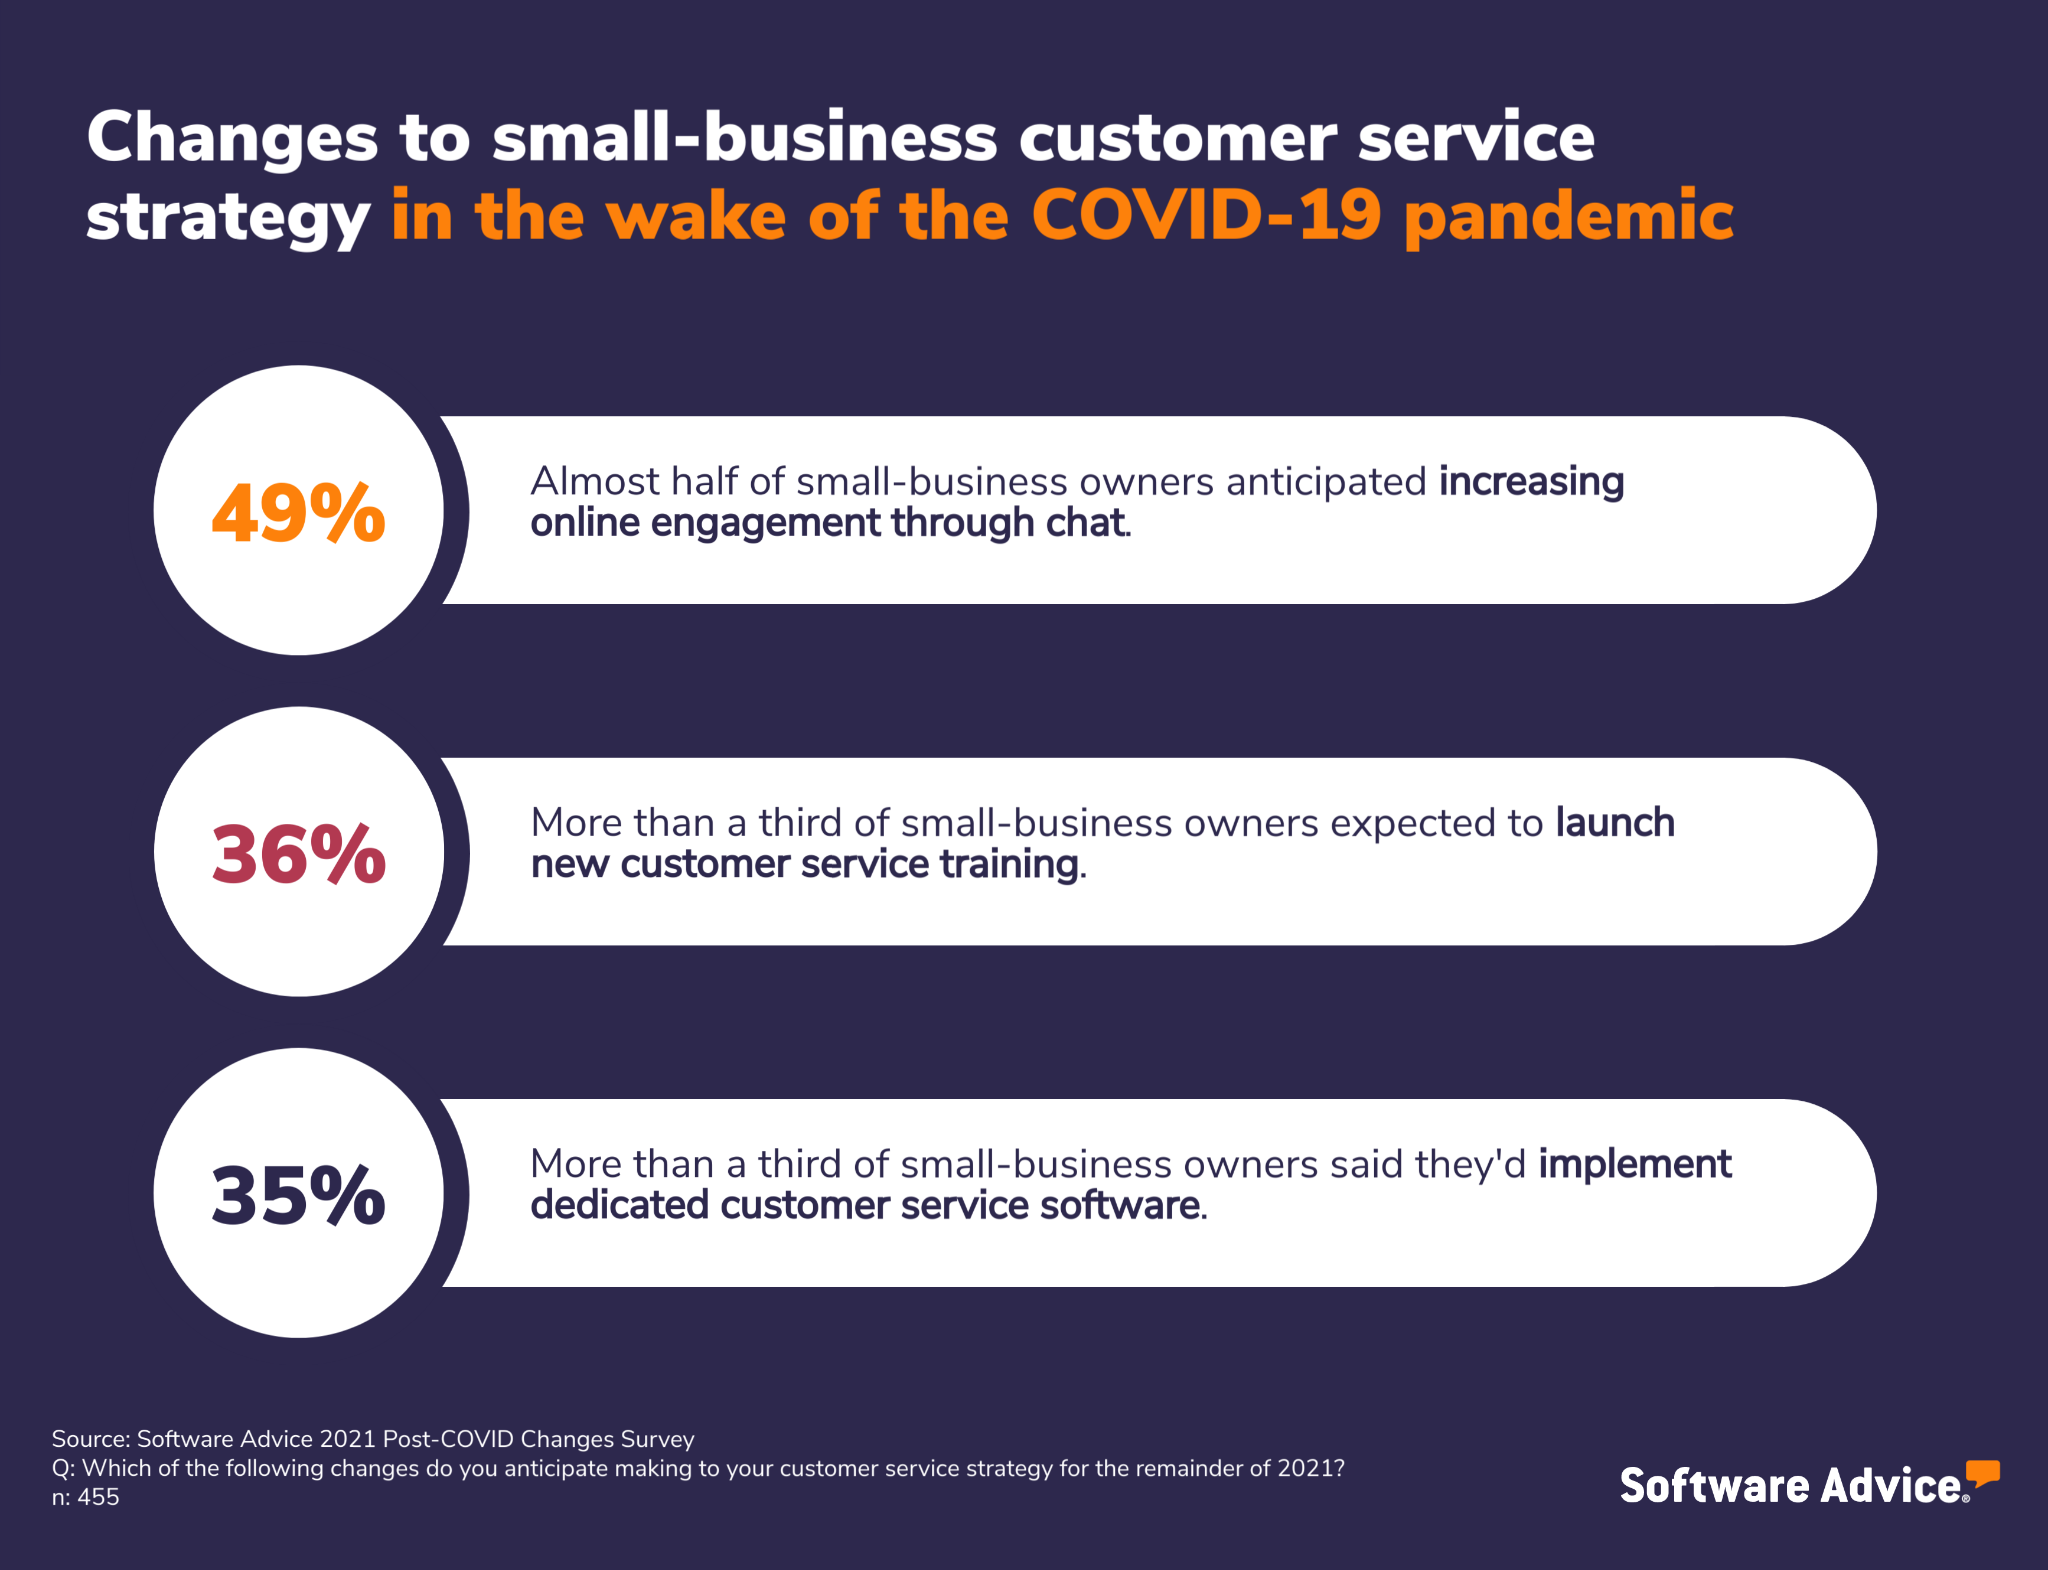 2021-Post-COVID-Changes-Survey:-Anticipated-changes-to-customer-service-strategy